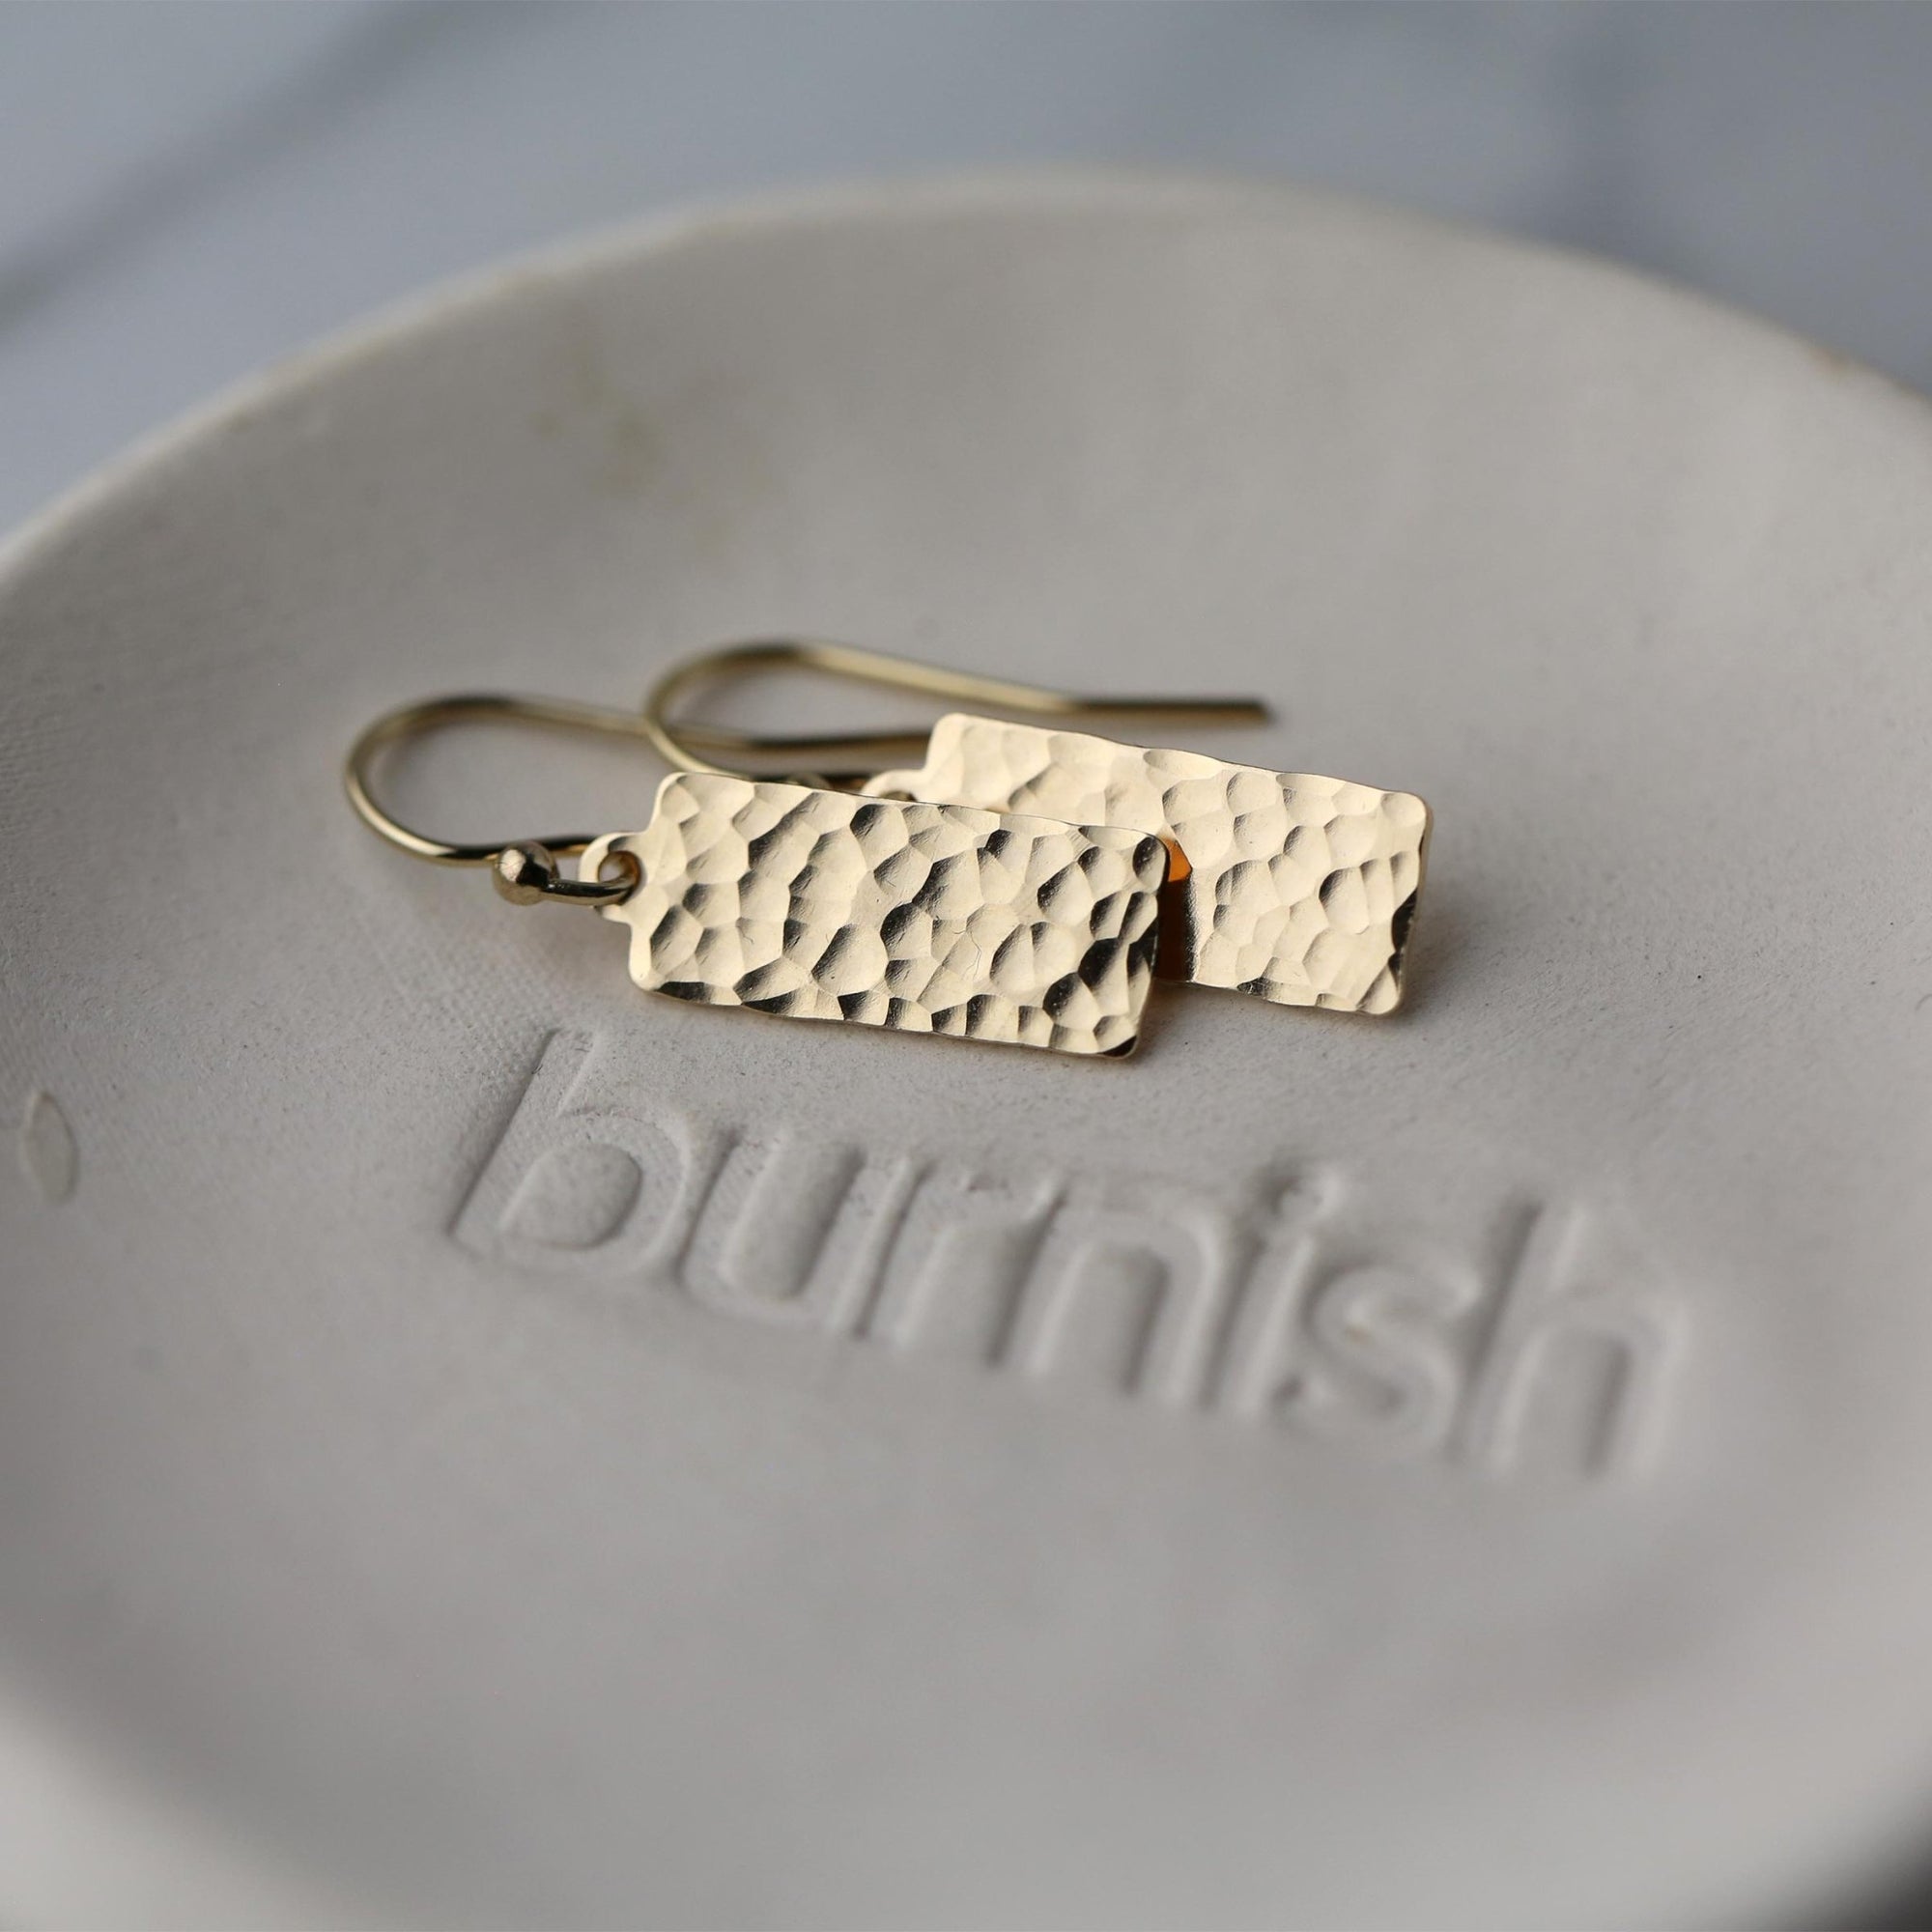 Hammered Gold Tag Earrings handmade by Burnish